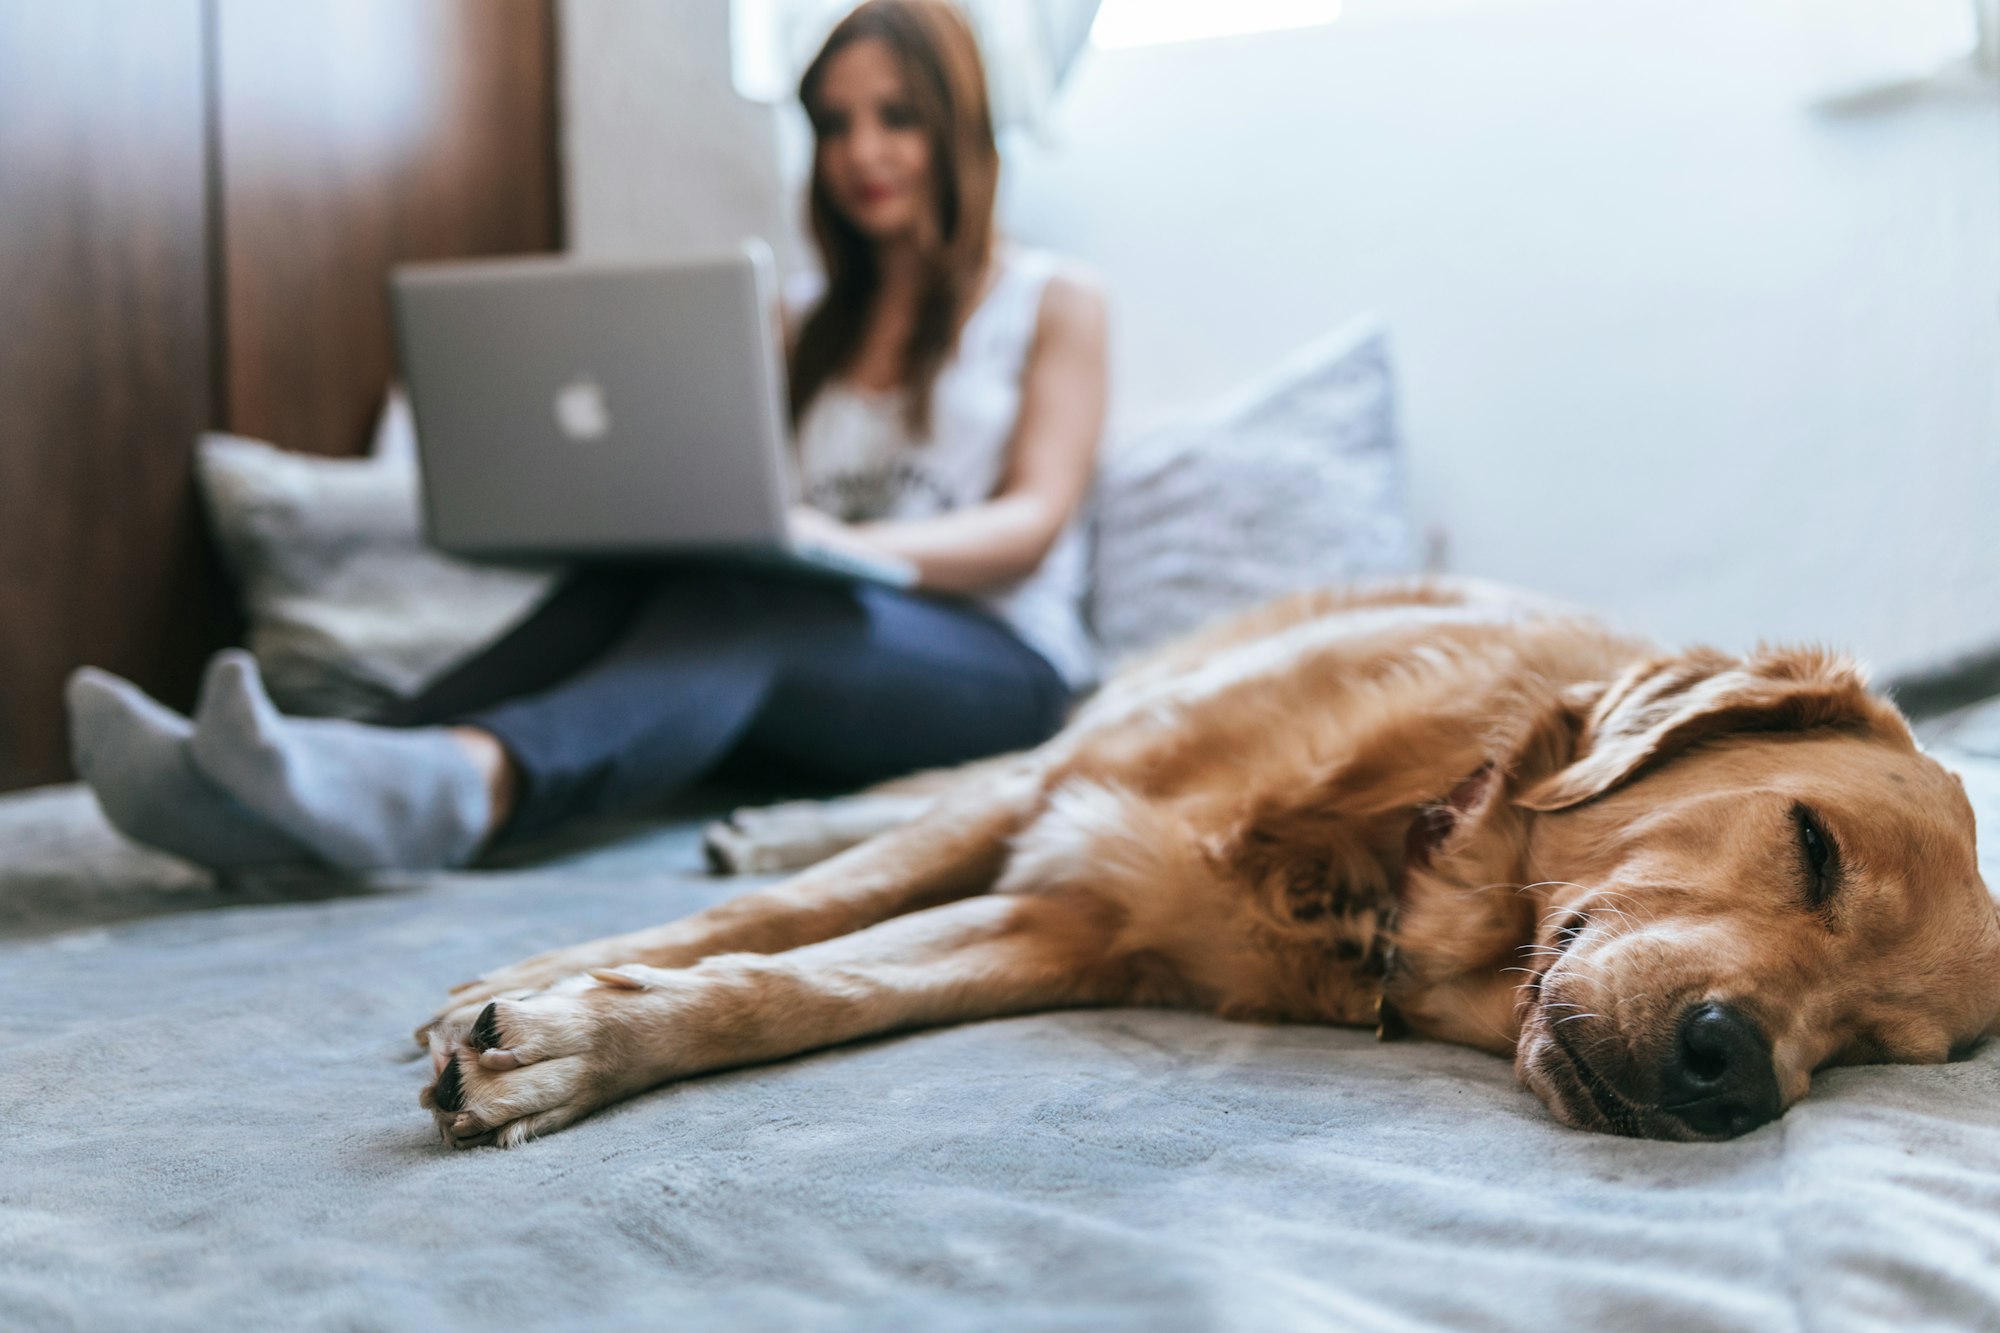 Is There Pet Insurance With No Waiting Period?